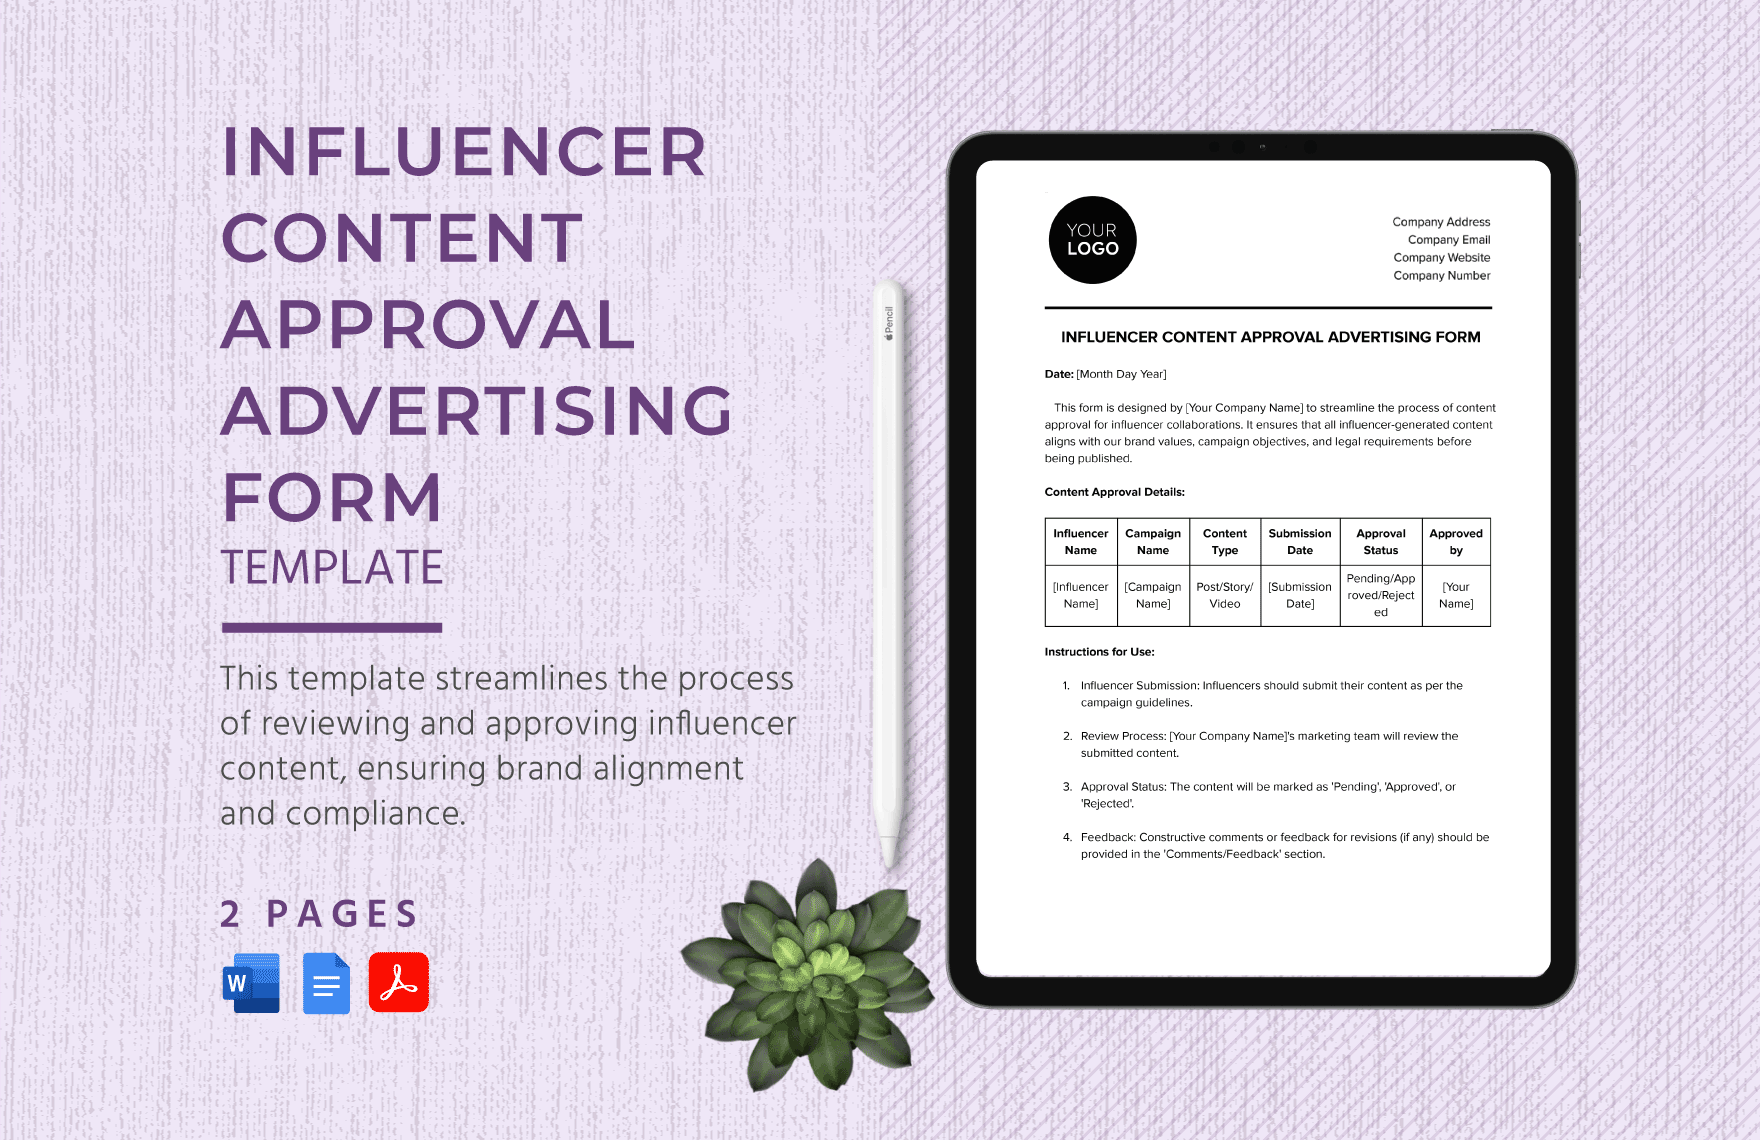 Influencer Content Approval Advertising Form Template in Word, Google Docs, PDF